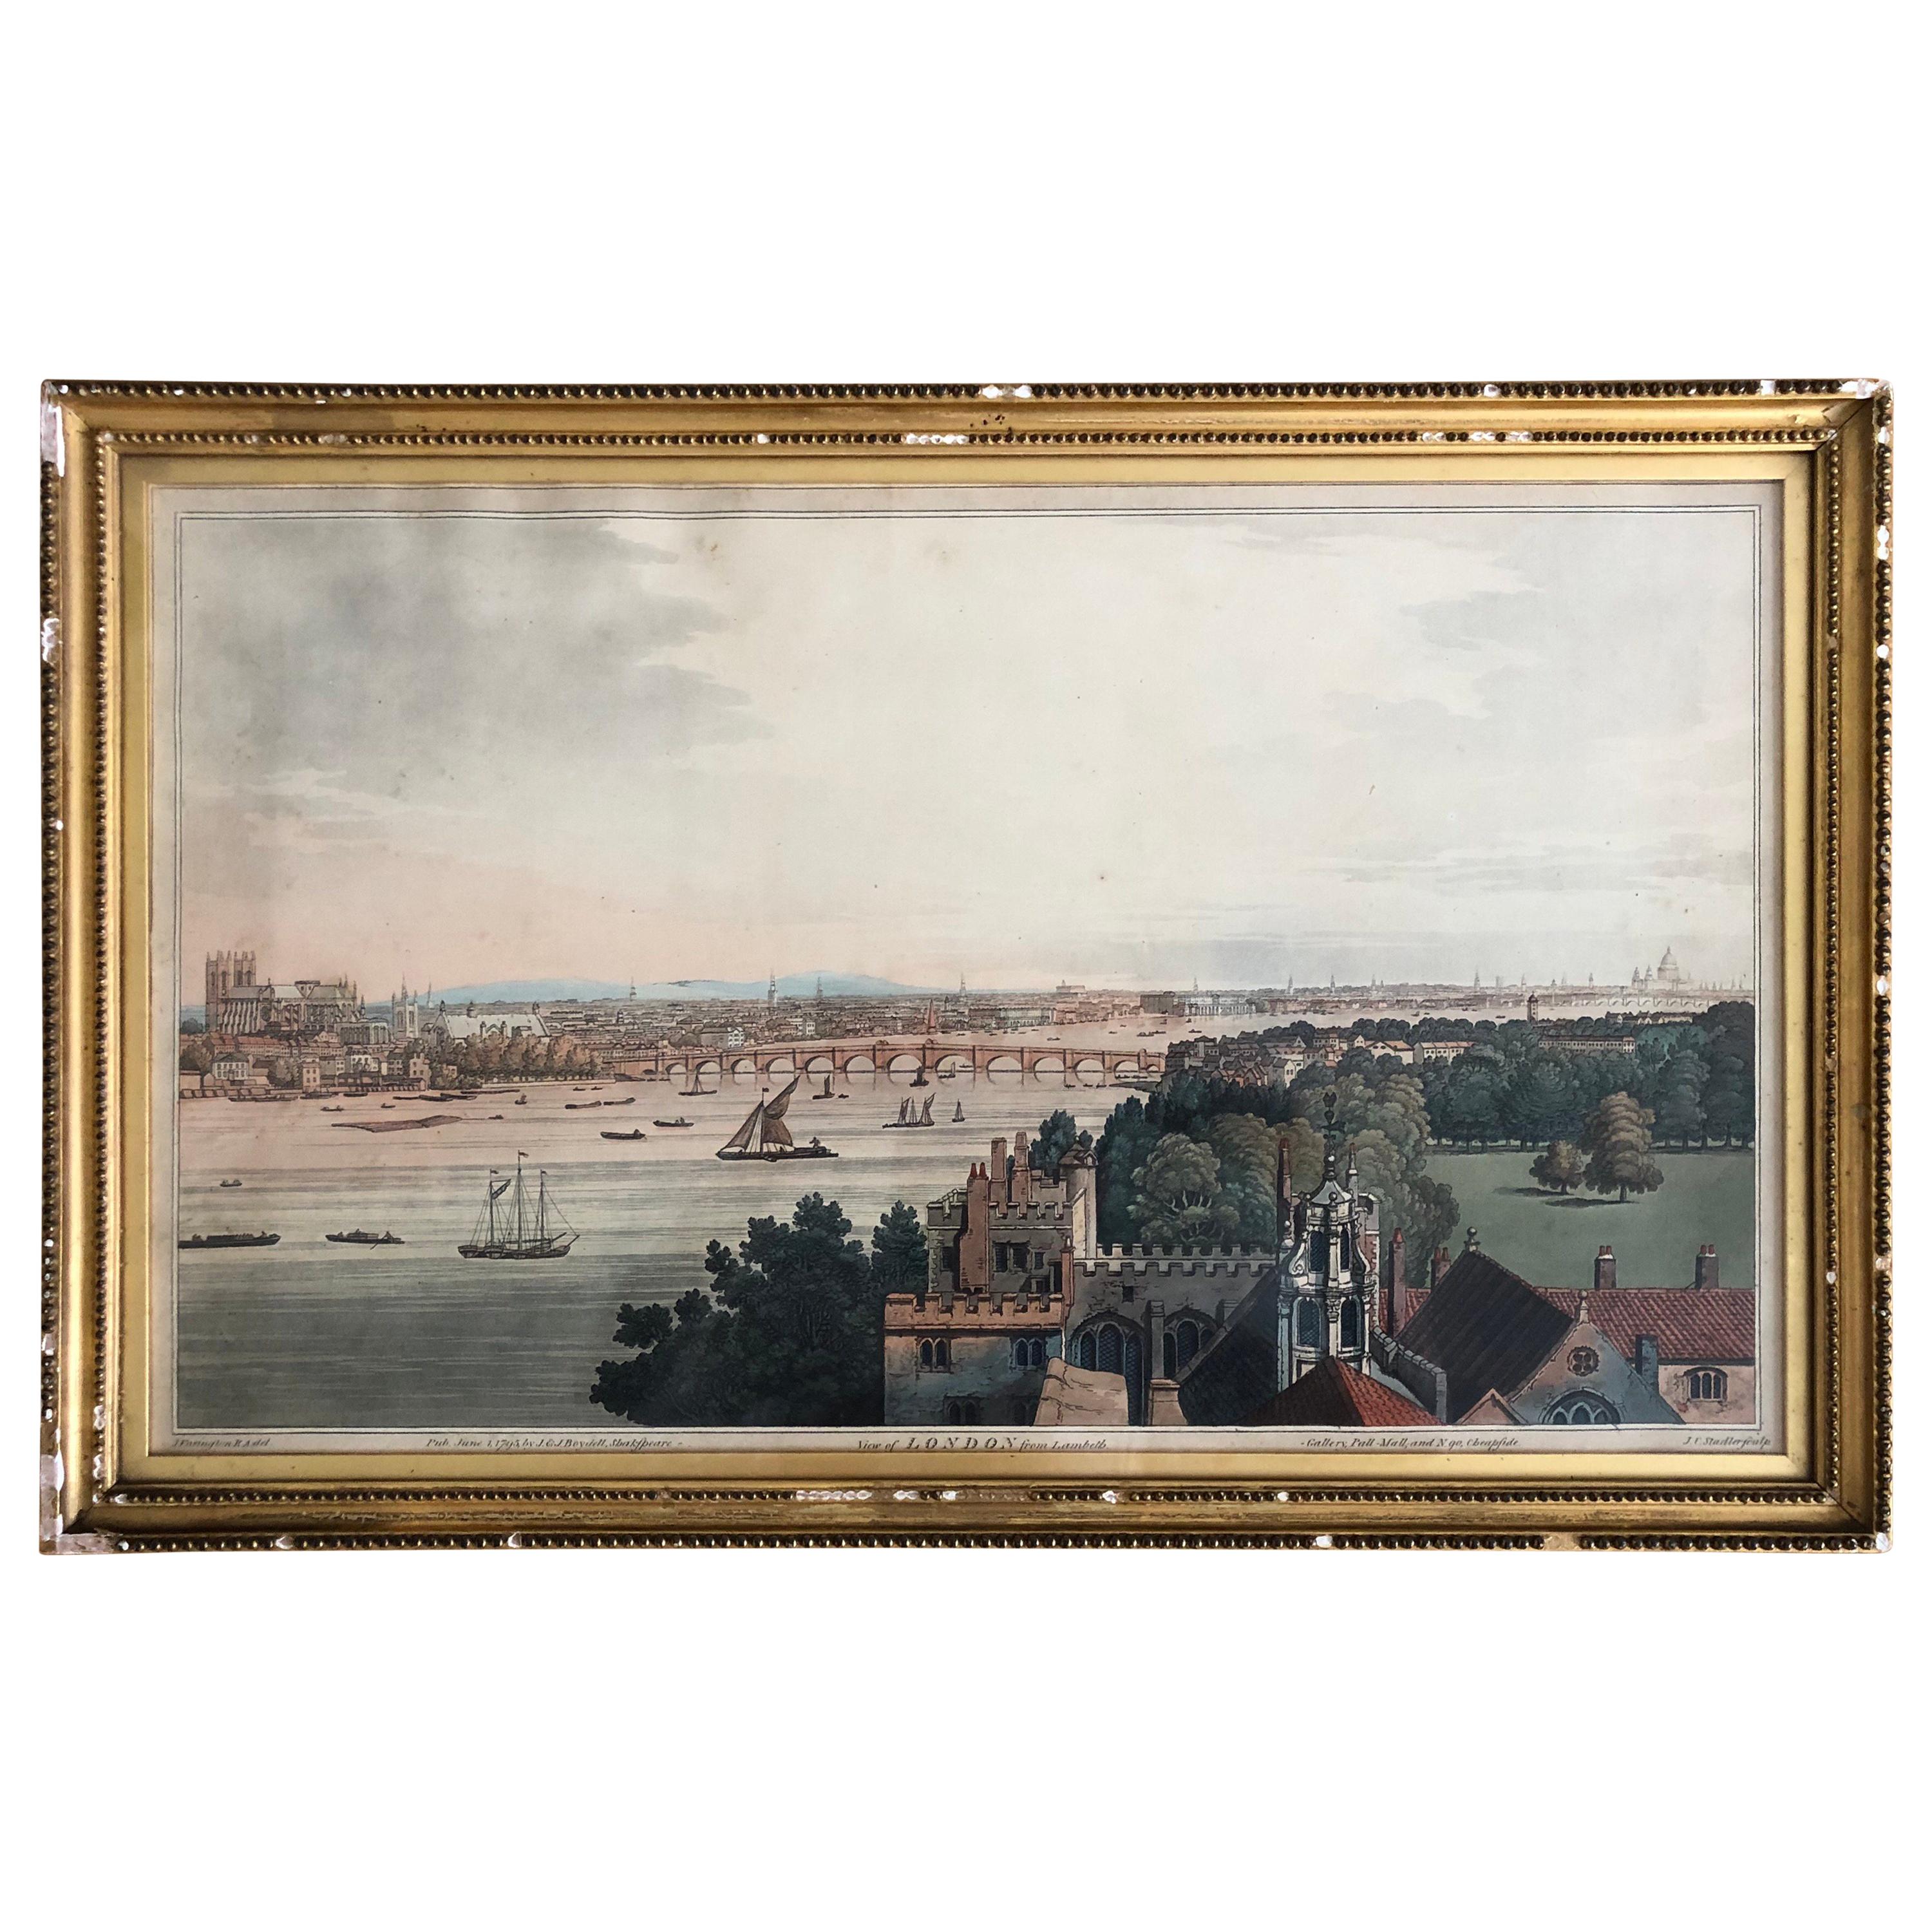 View of London From Lambeth Francis Harvey , Gallery Pall-Mall, London, 1795